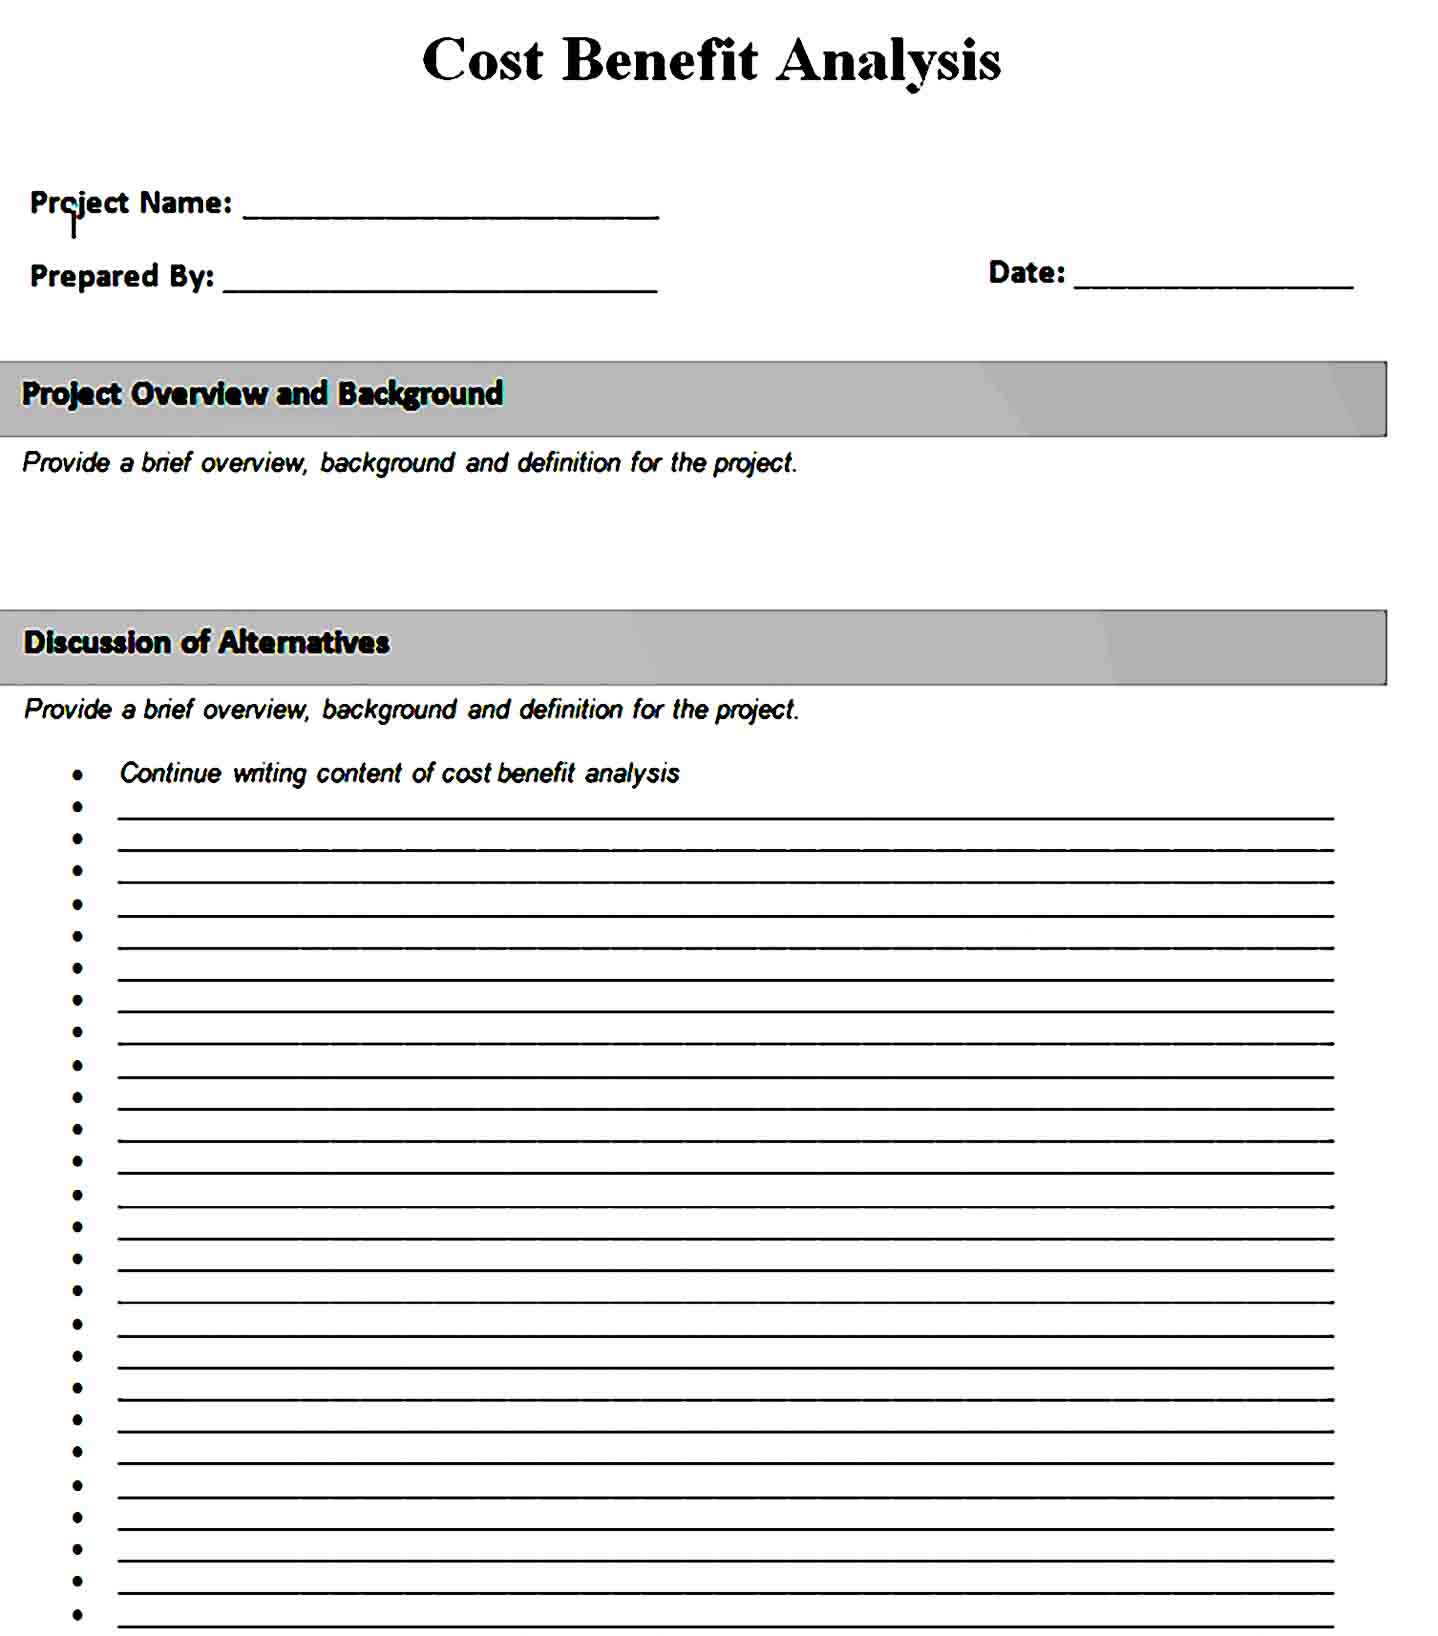 Cost Benefit Analysis Template 16